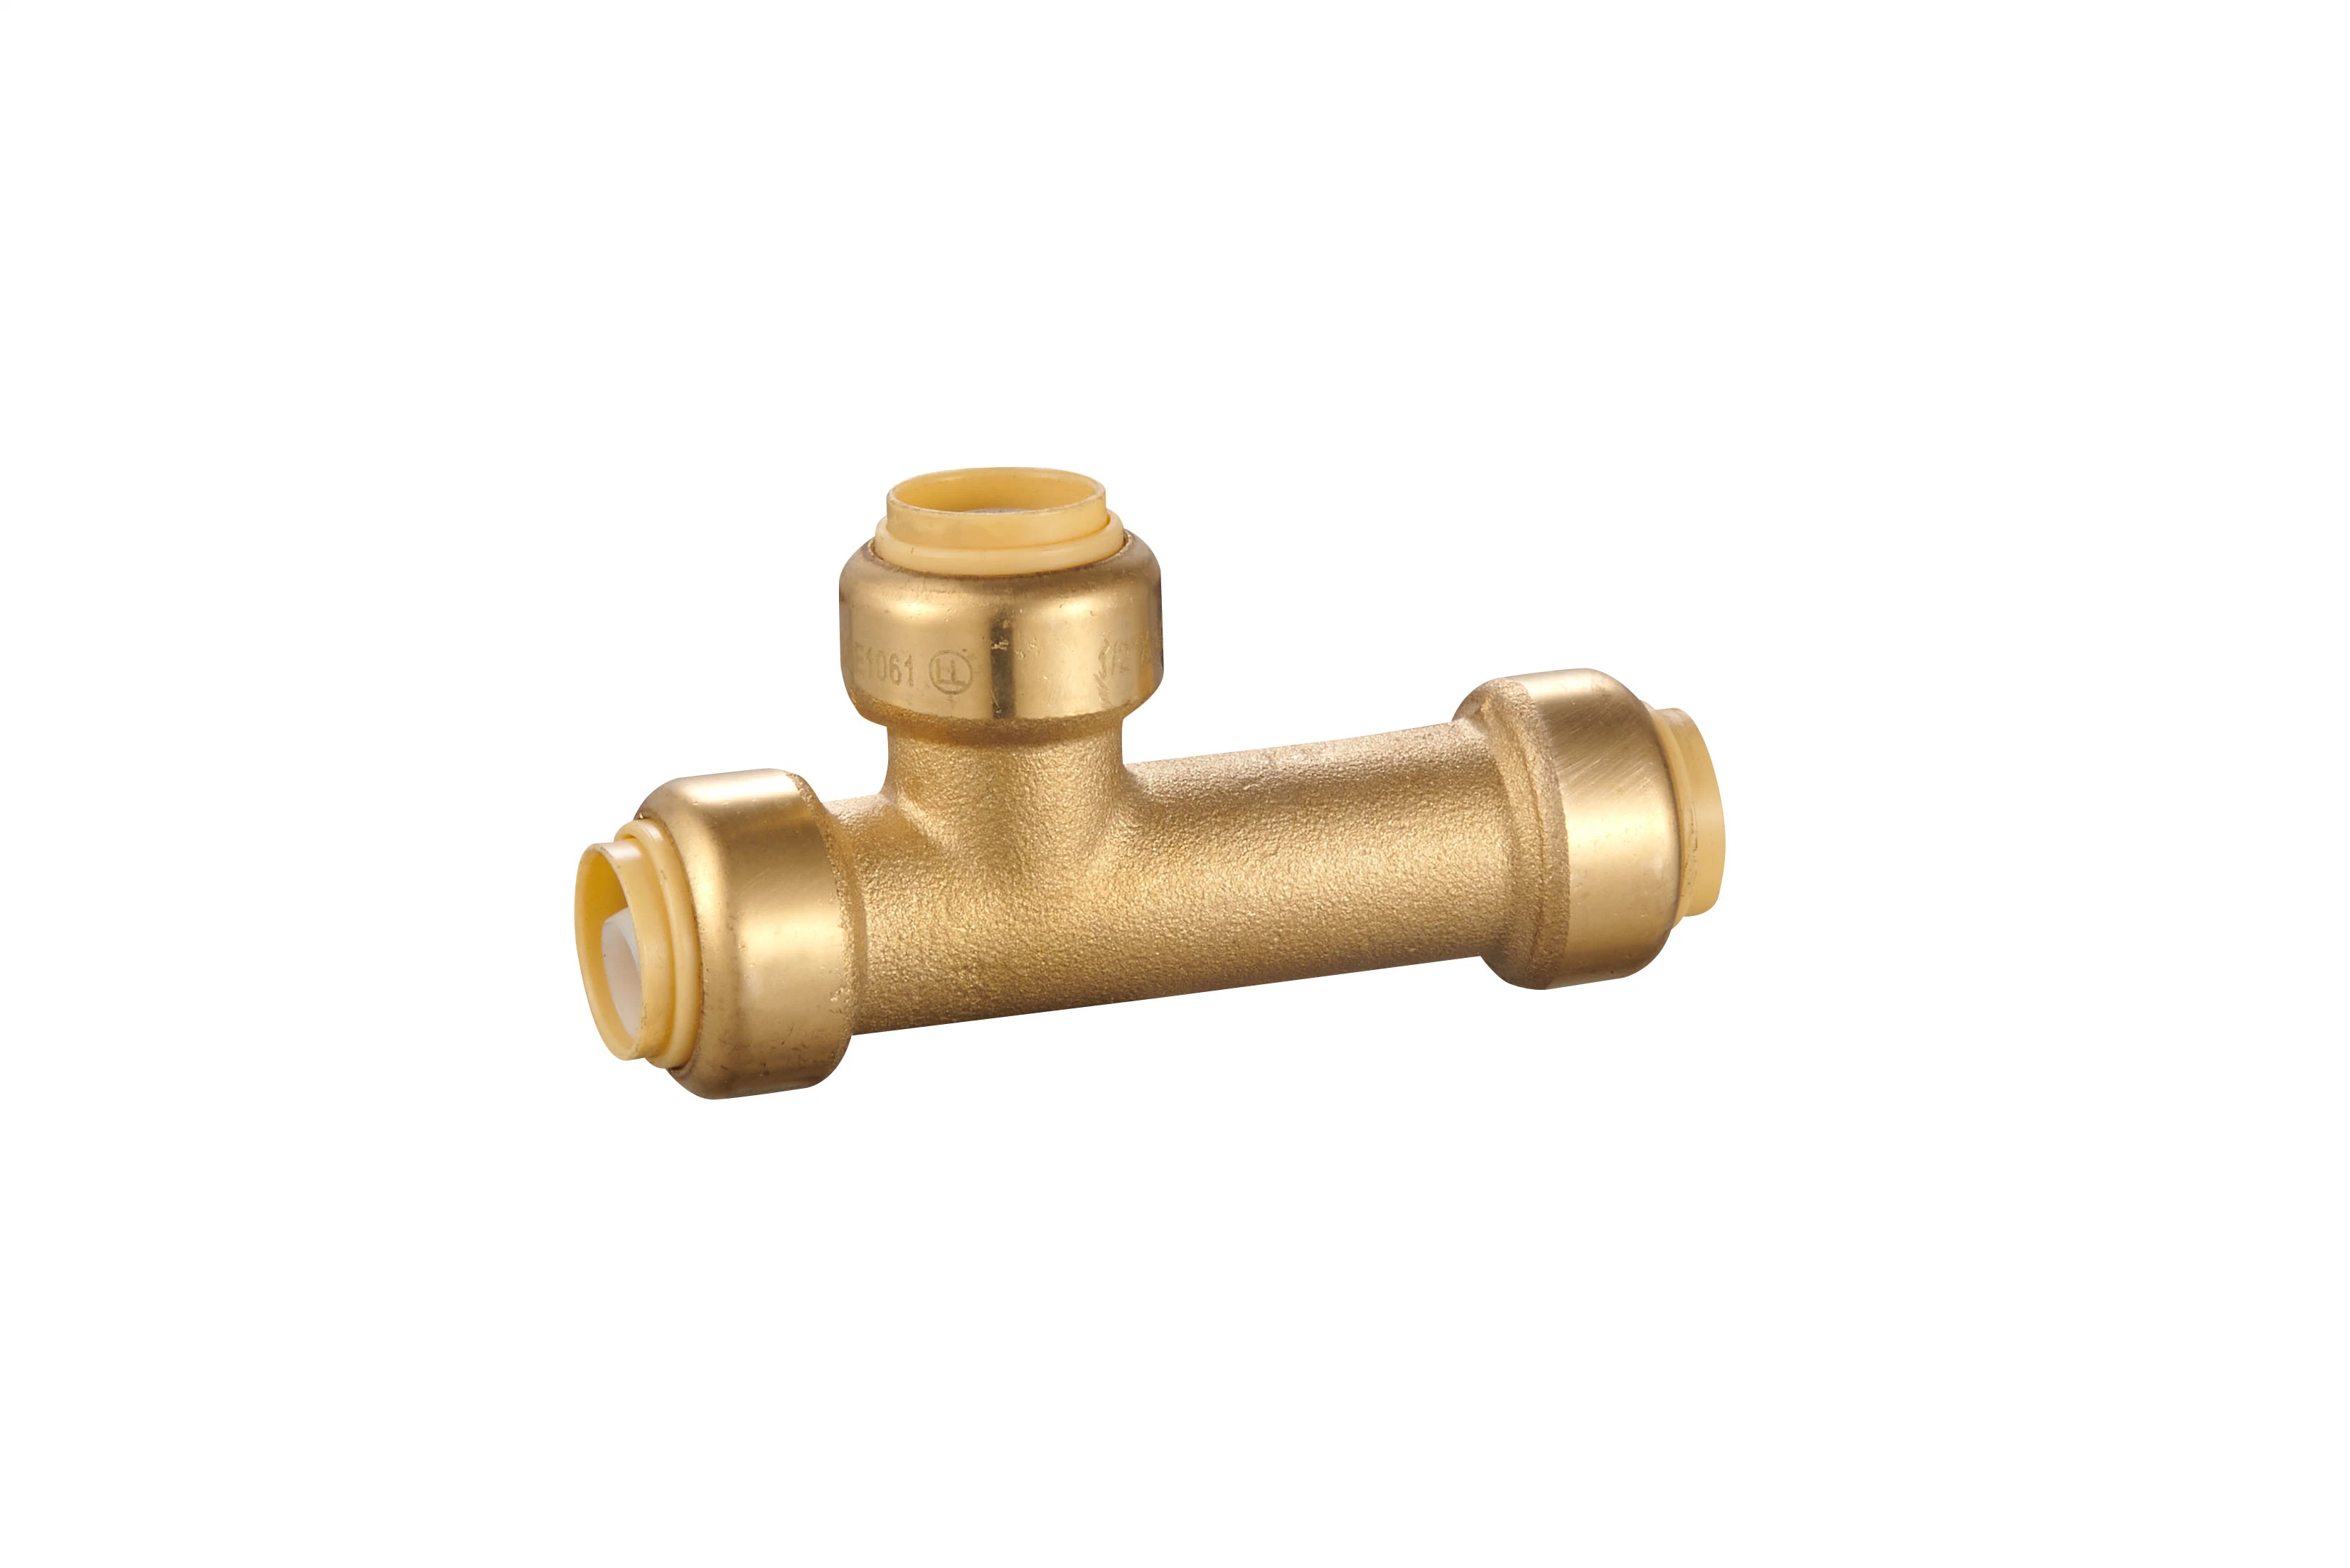 Sanitary Plumbing Fittings, Brass Joints, Reducers, Complete Sets of Pipe Fittings